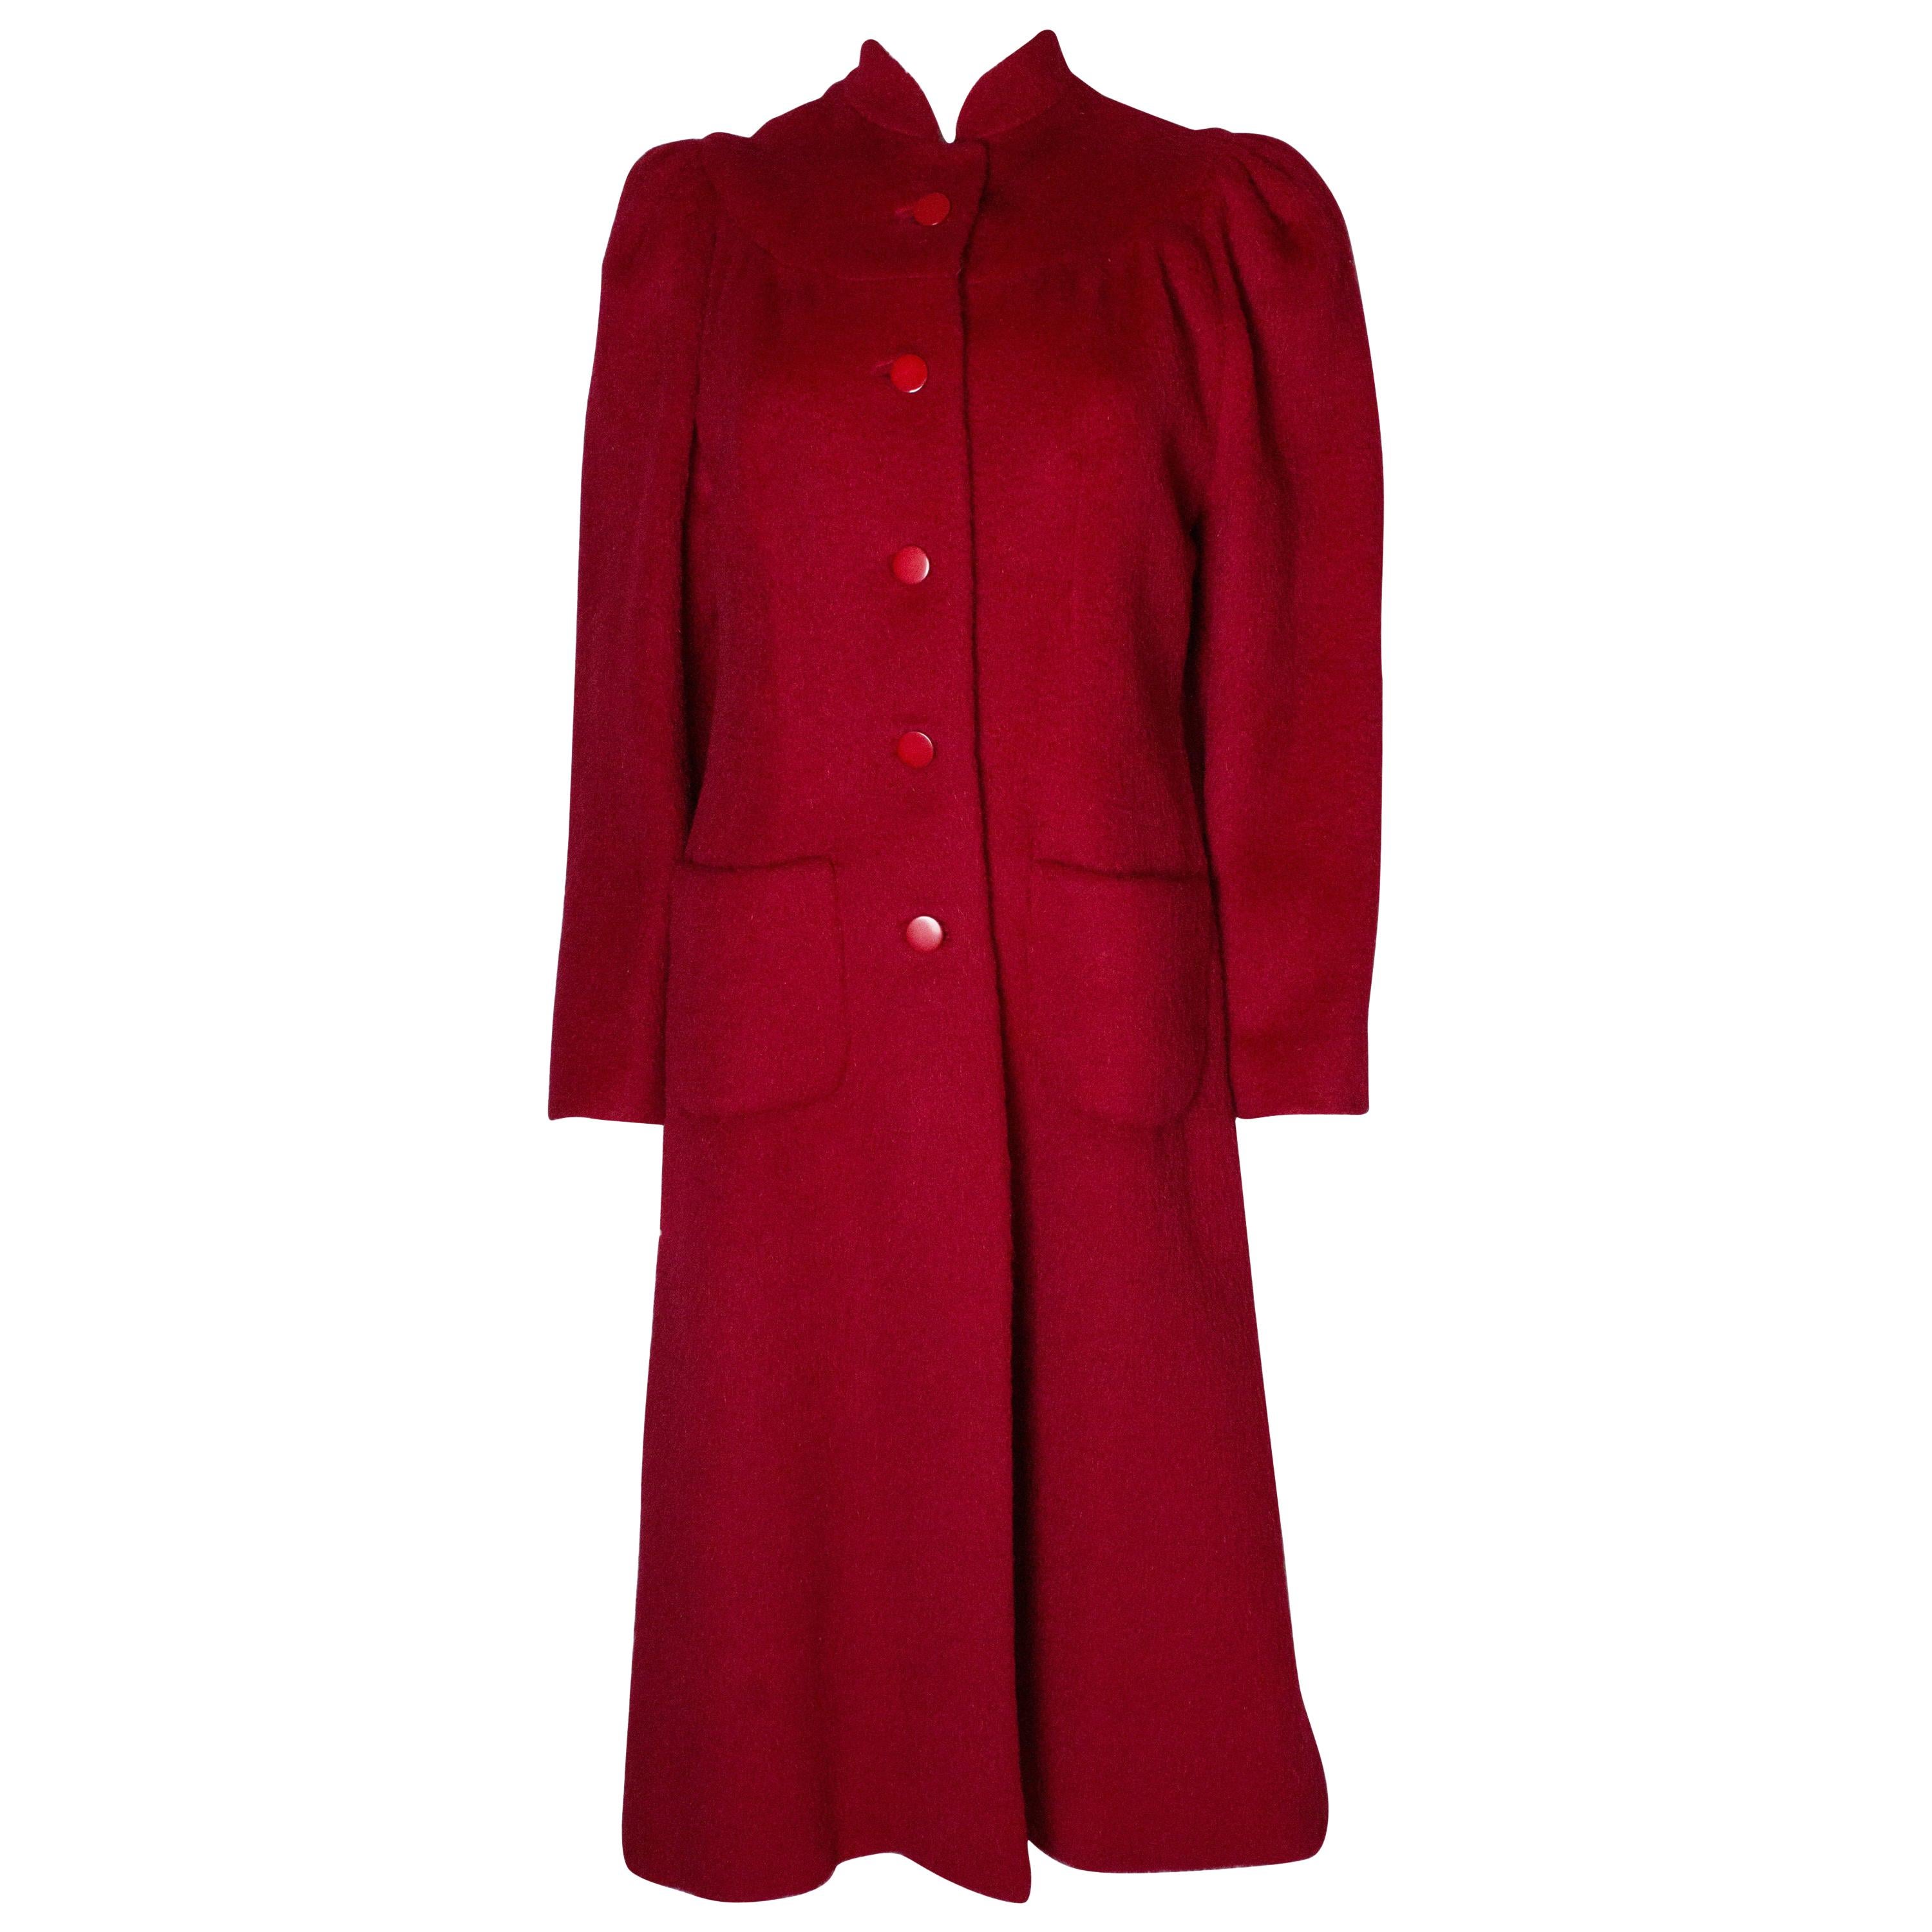 Vintage Donald Campbell Red Coat